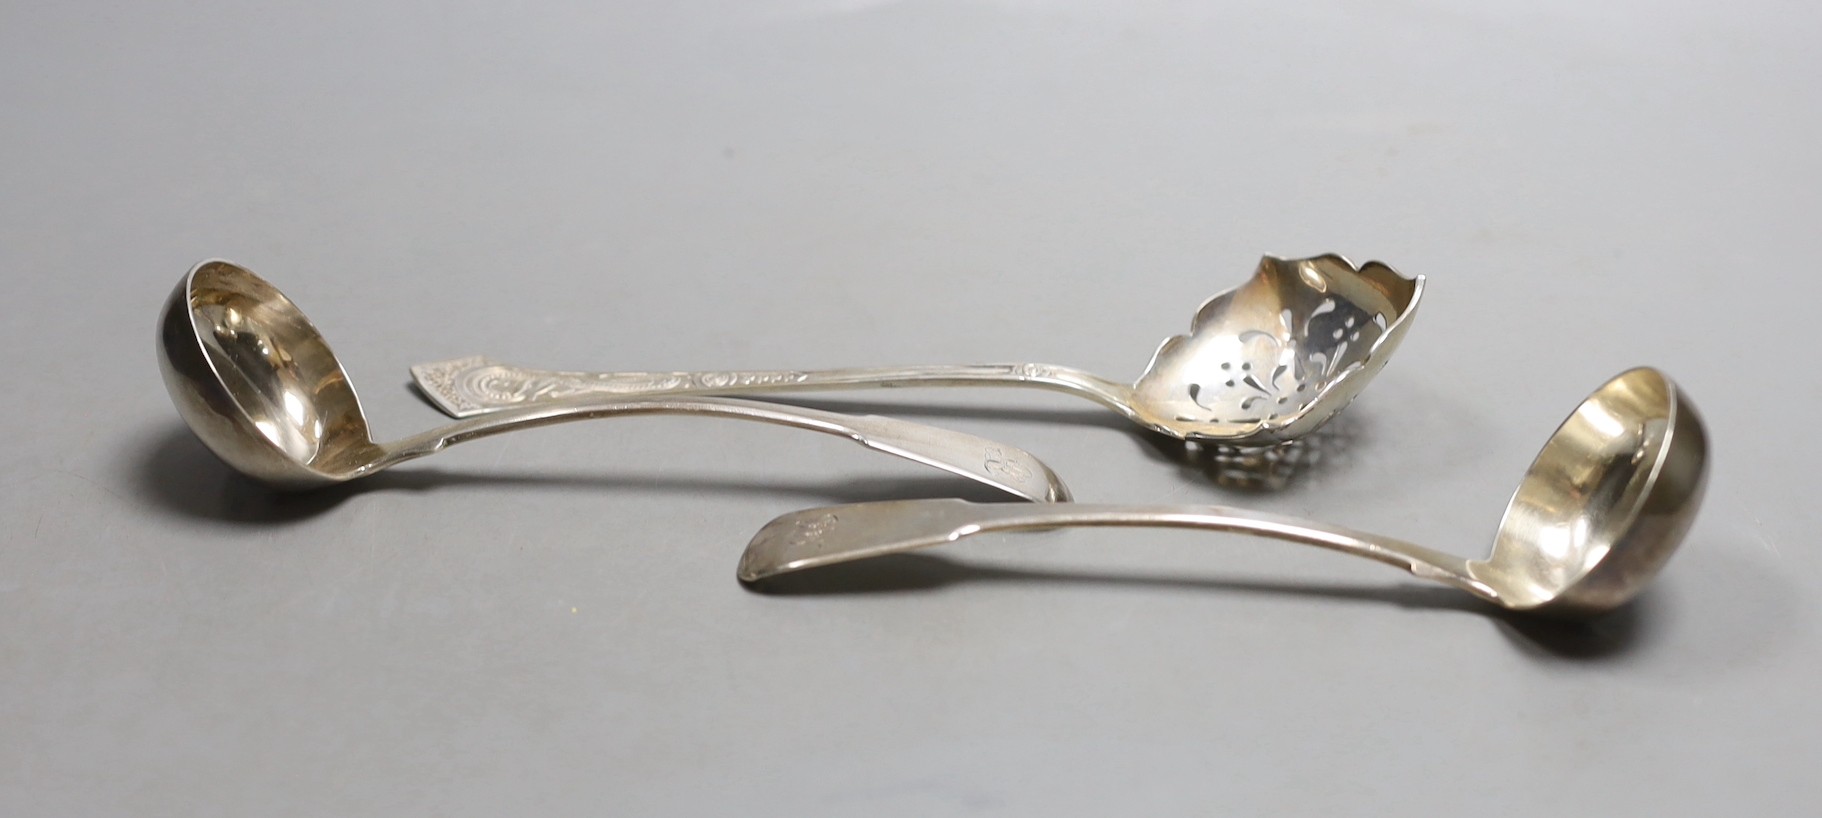 A pair of George IV Scottish silver fiddle pattern toddy ladles, James Mackay, Edinburgh 1827, and a Danish white metal sifting spoon.